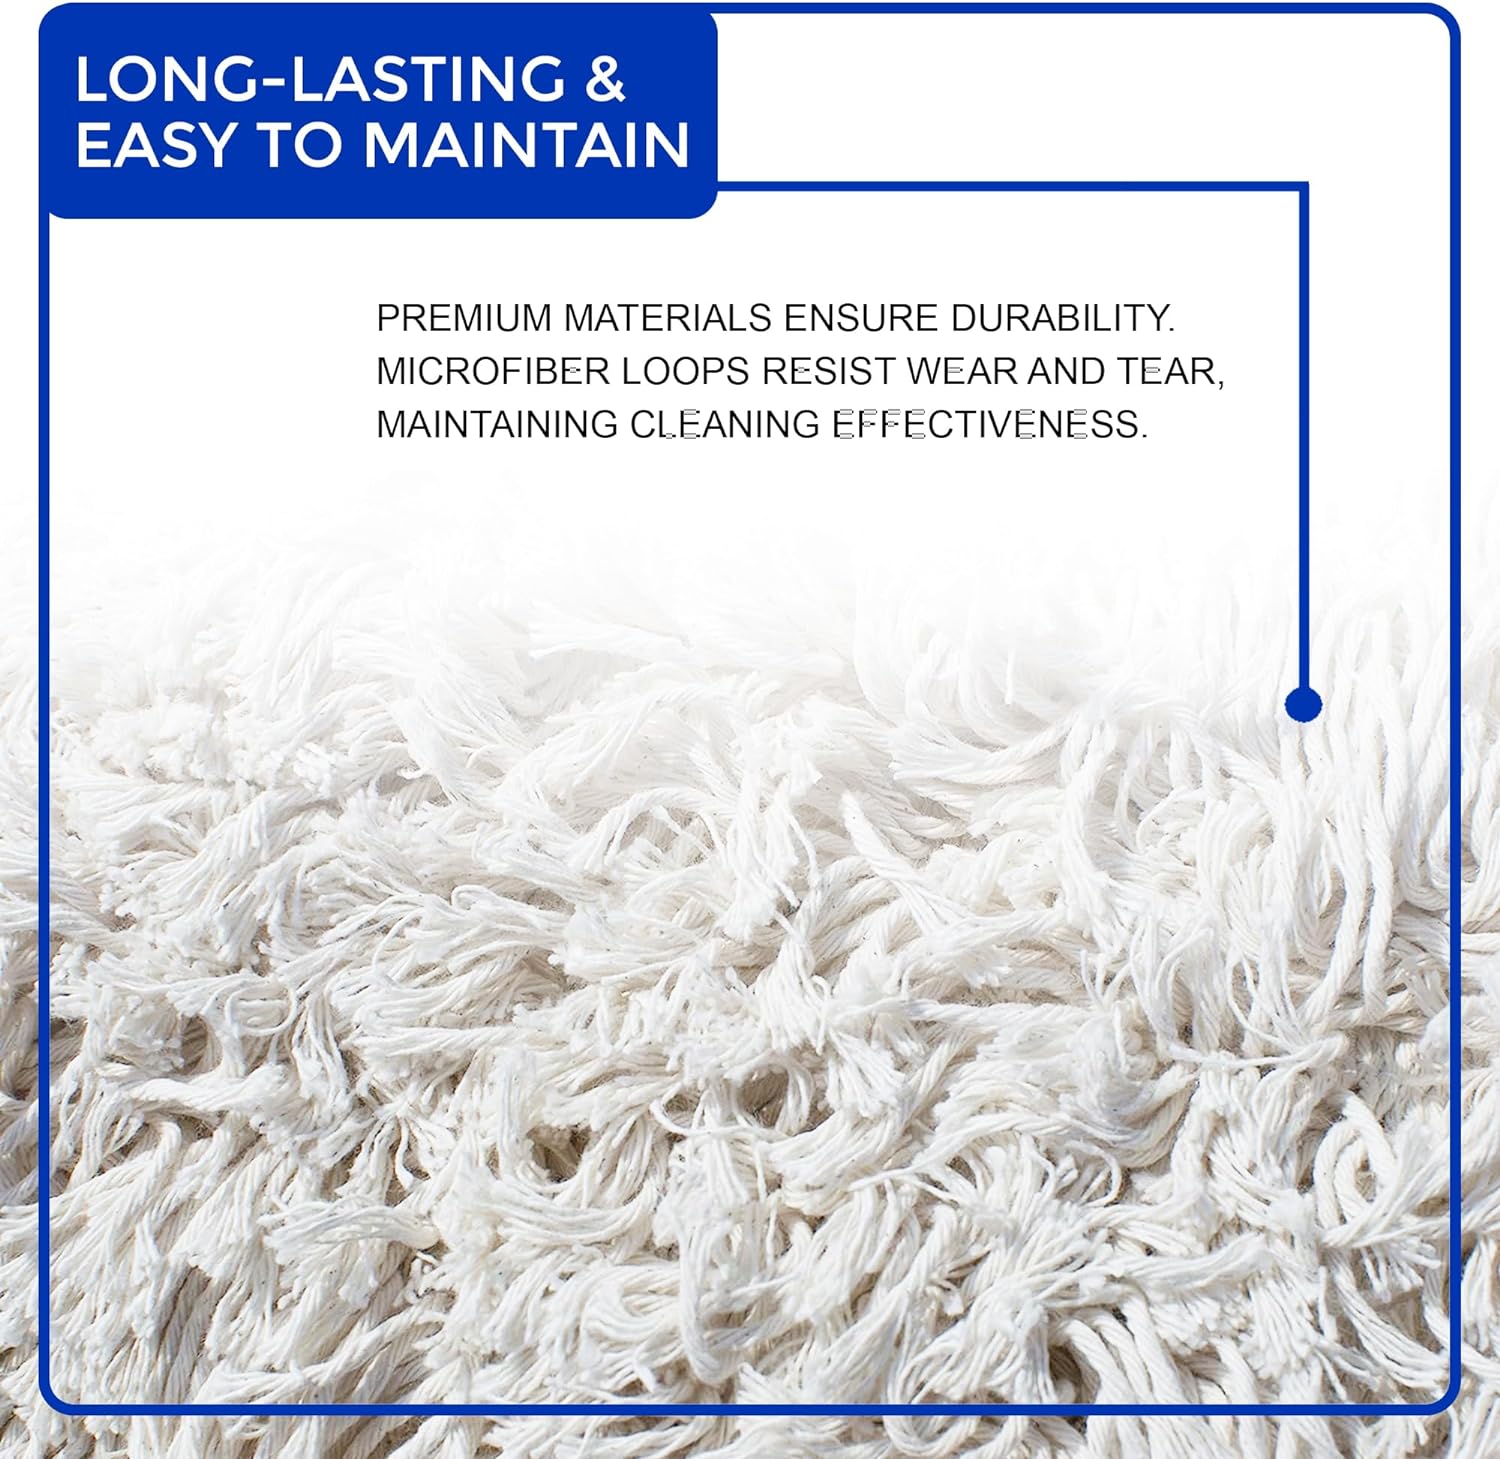 nine forty industrial | commercial usa cotton floor dust mop head refill | replacement (2 pack, 24" wide x 5") - image 5 of 8